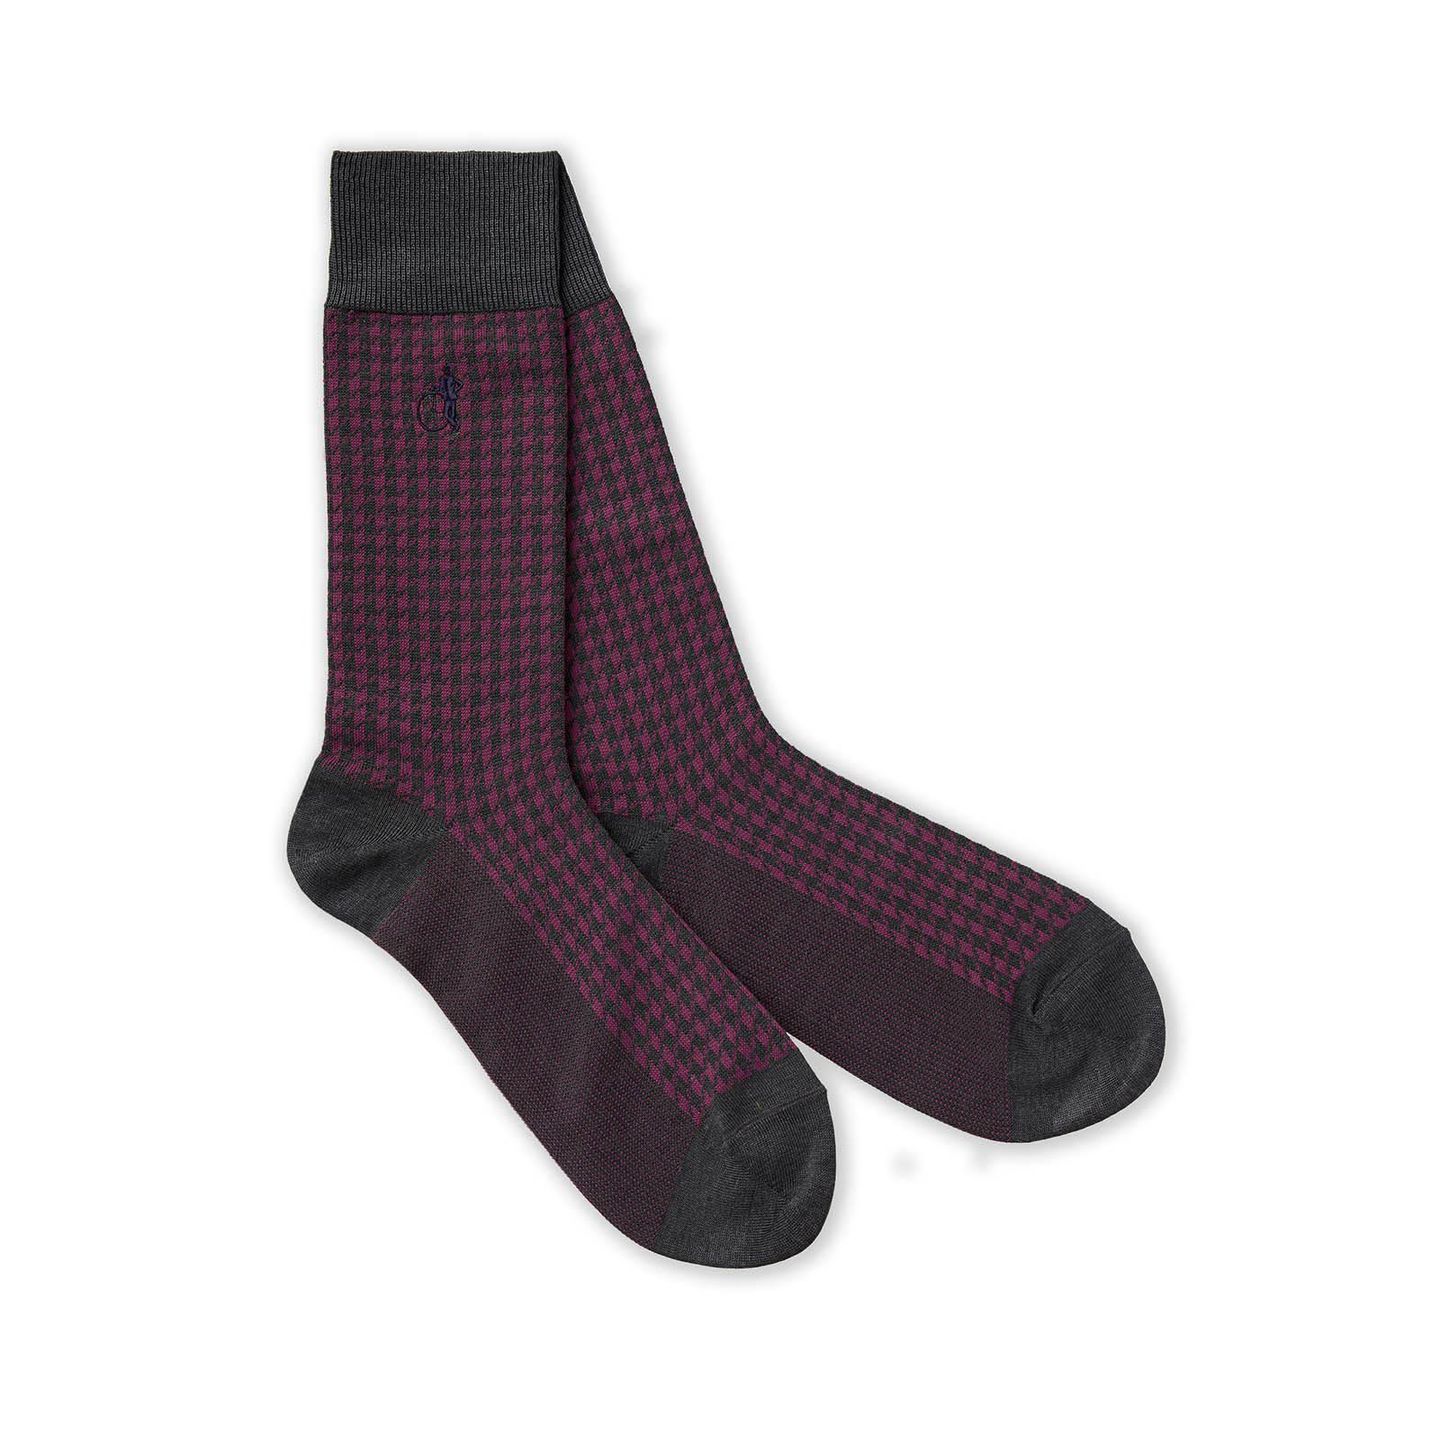 Houndstooth patterned socks in mulberry purple and black